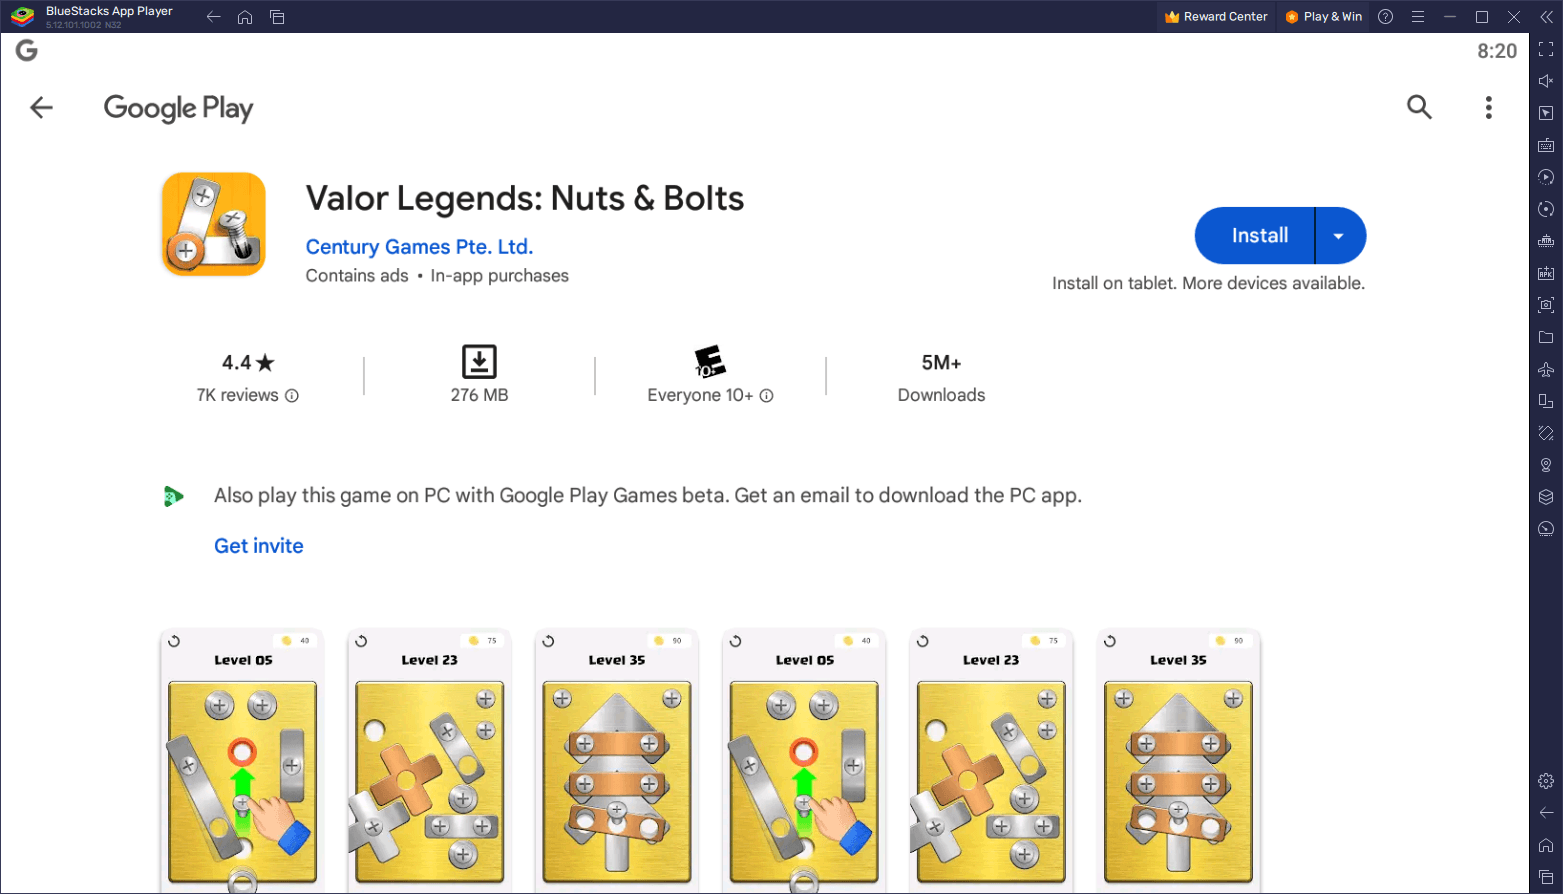 Go Nuts - Apps on Google Play